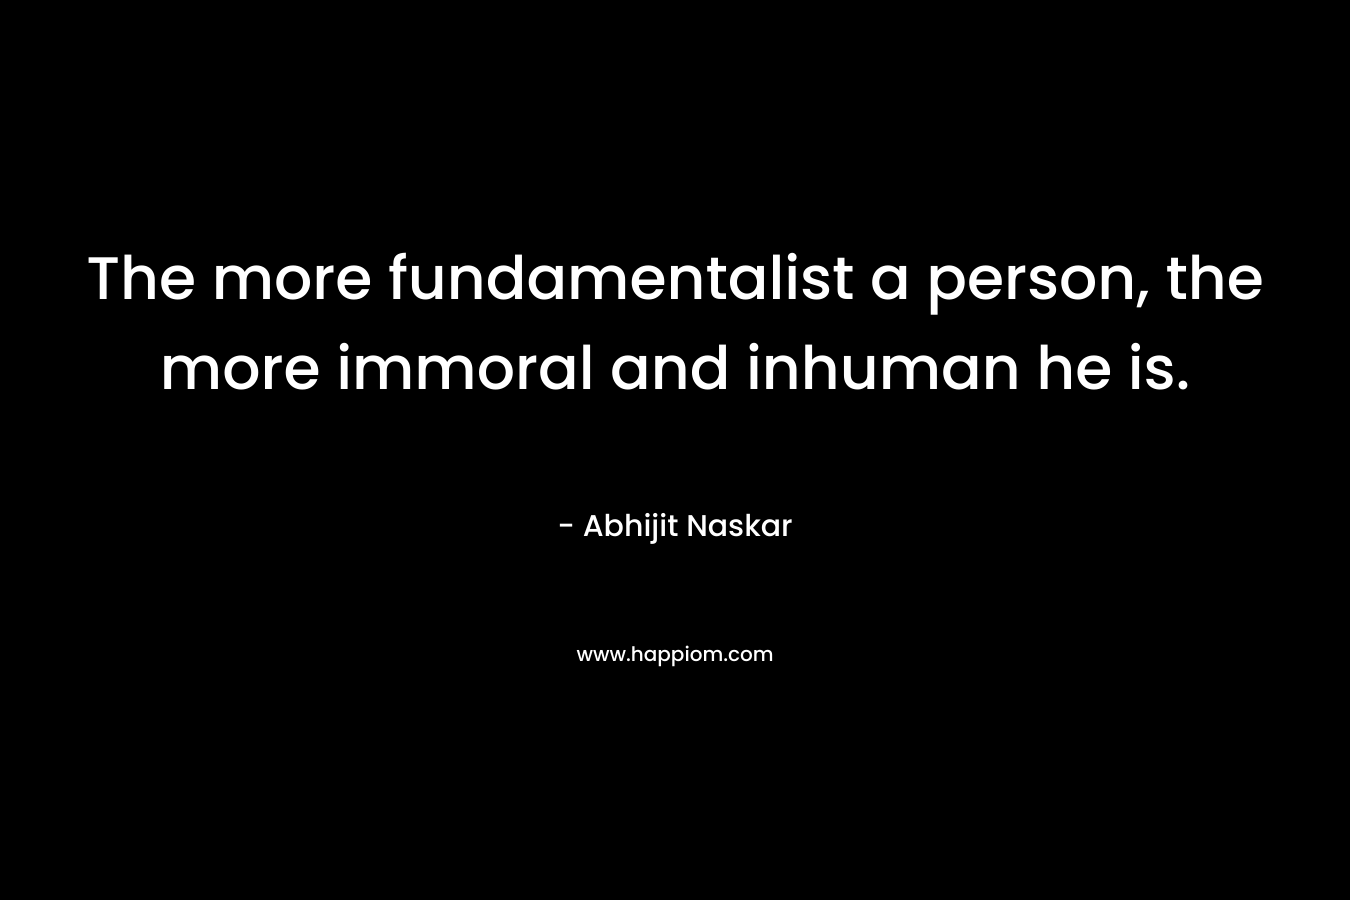 The more fundamentalist a person, the more immoral and inhuman he is.